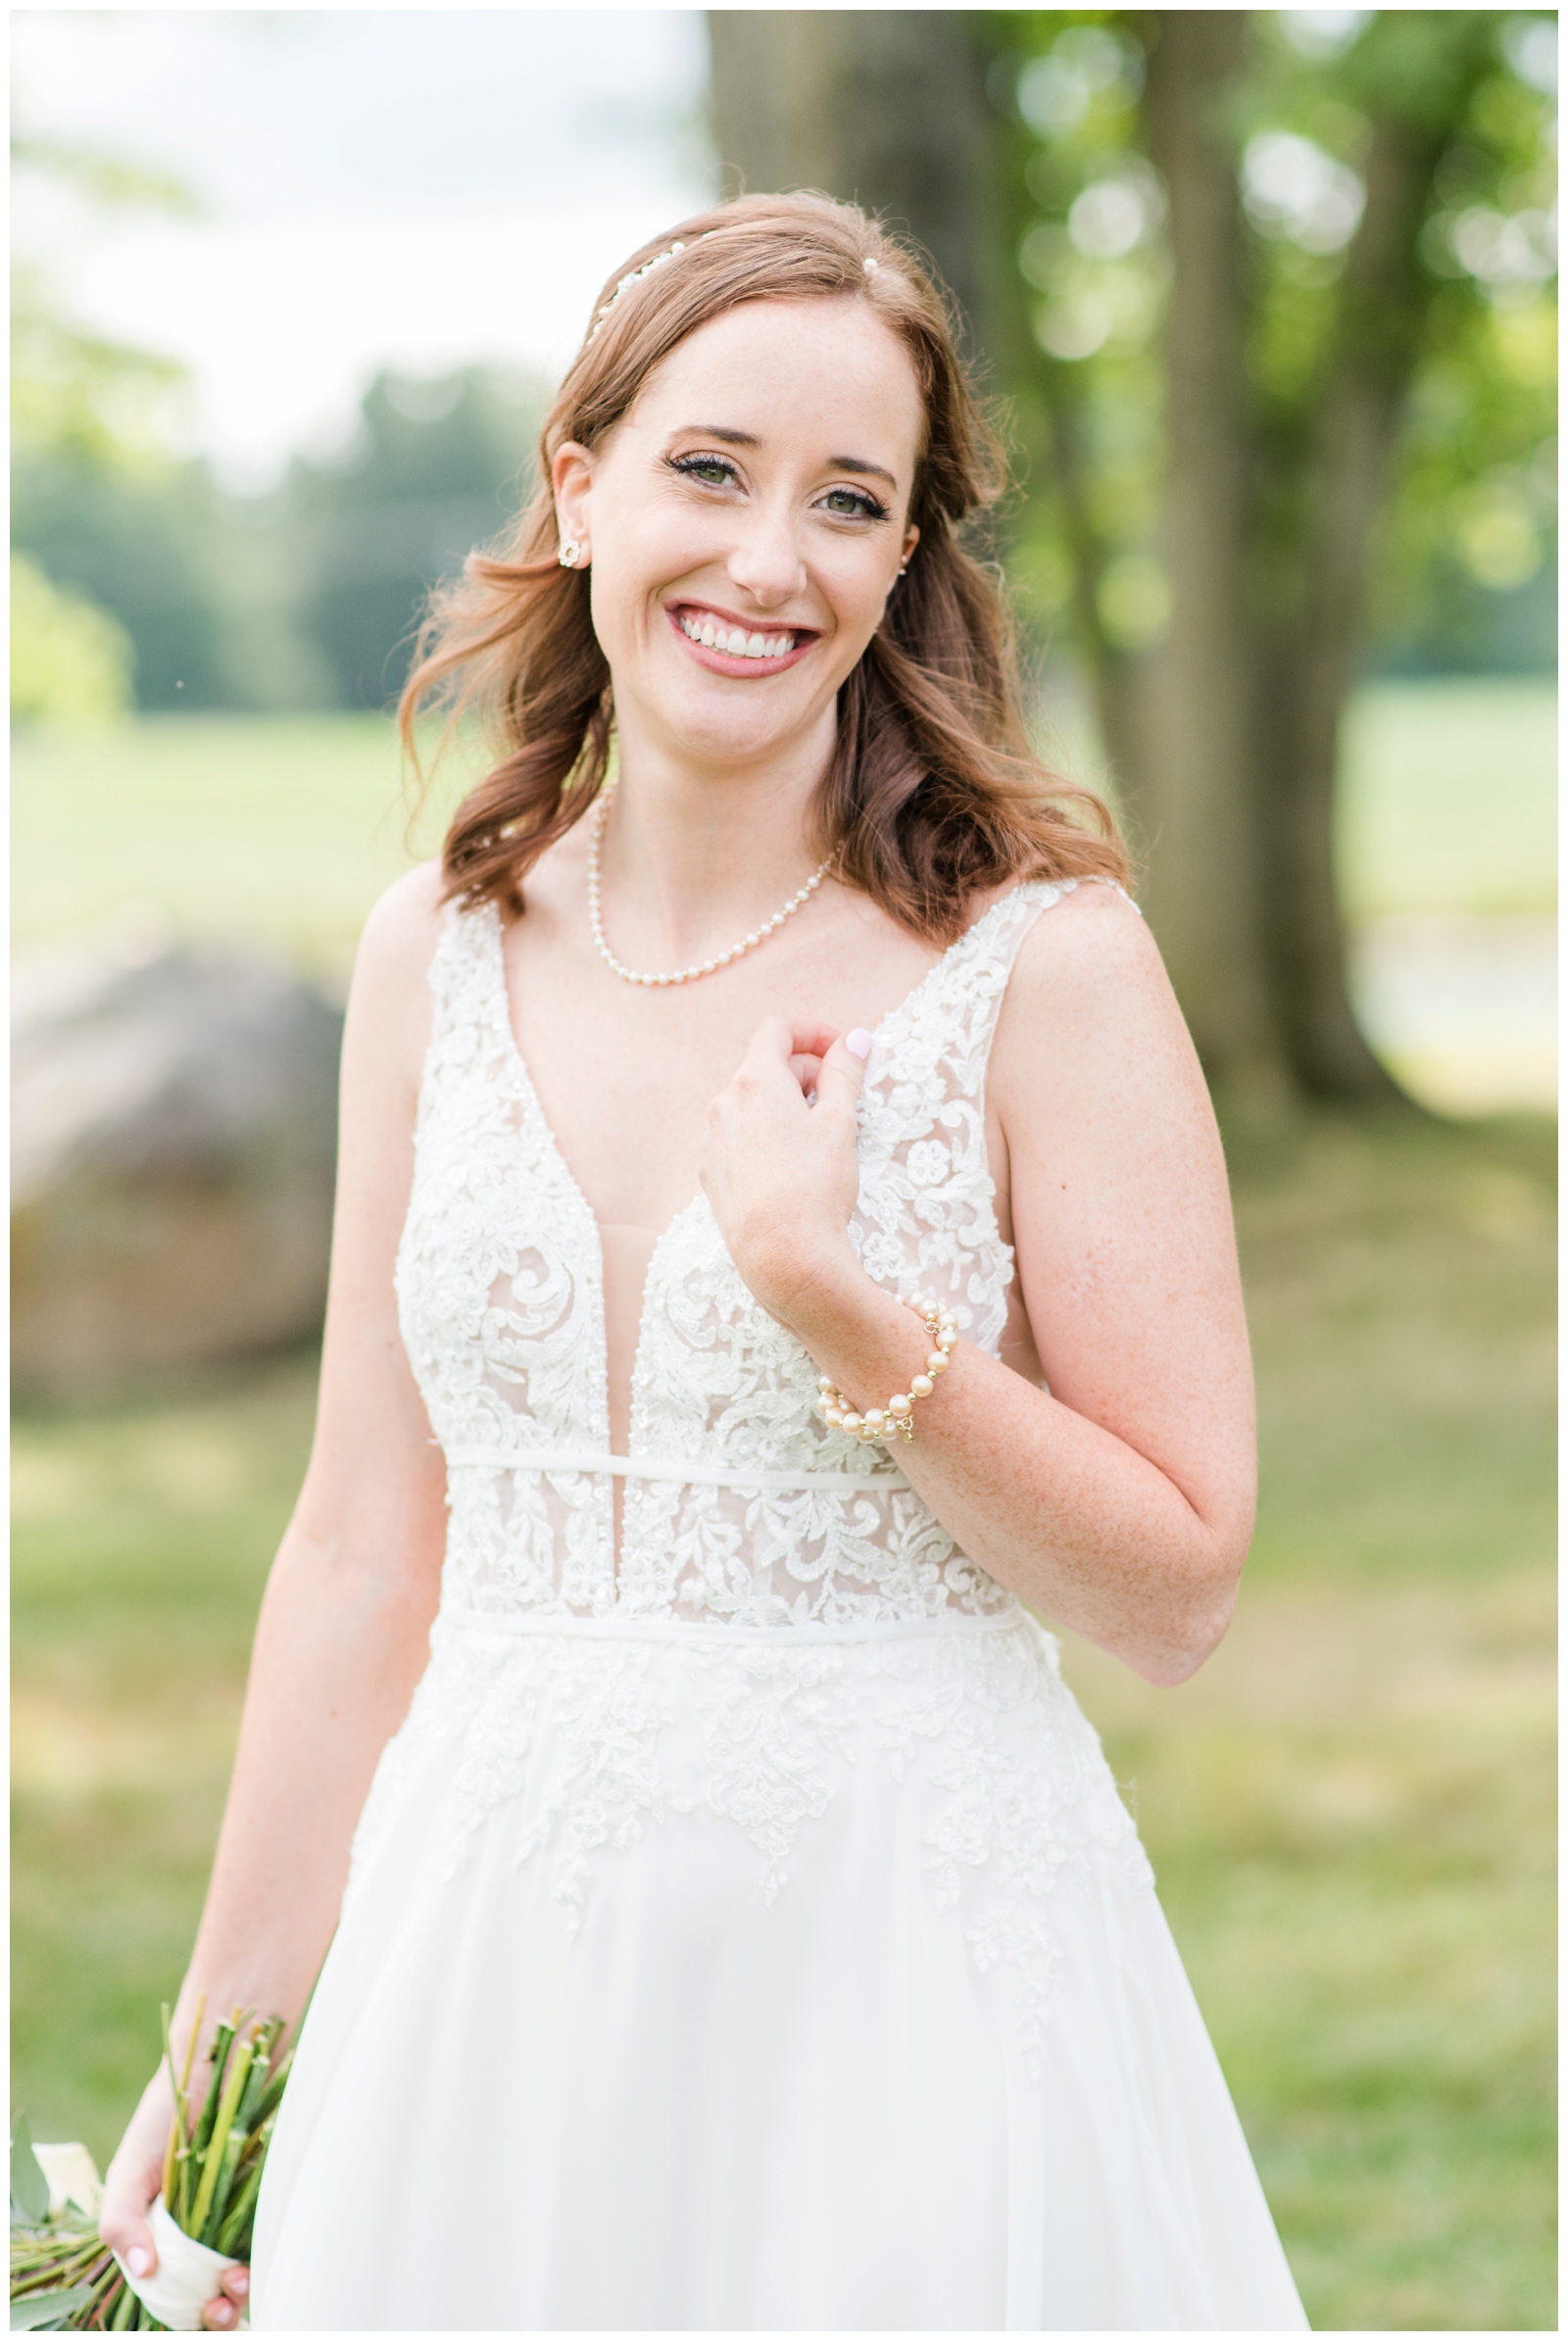 Ohio bride poses with hand on wedding dress showing off pearl bracelet 